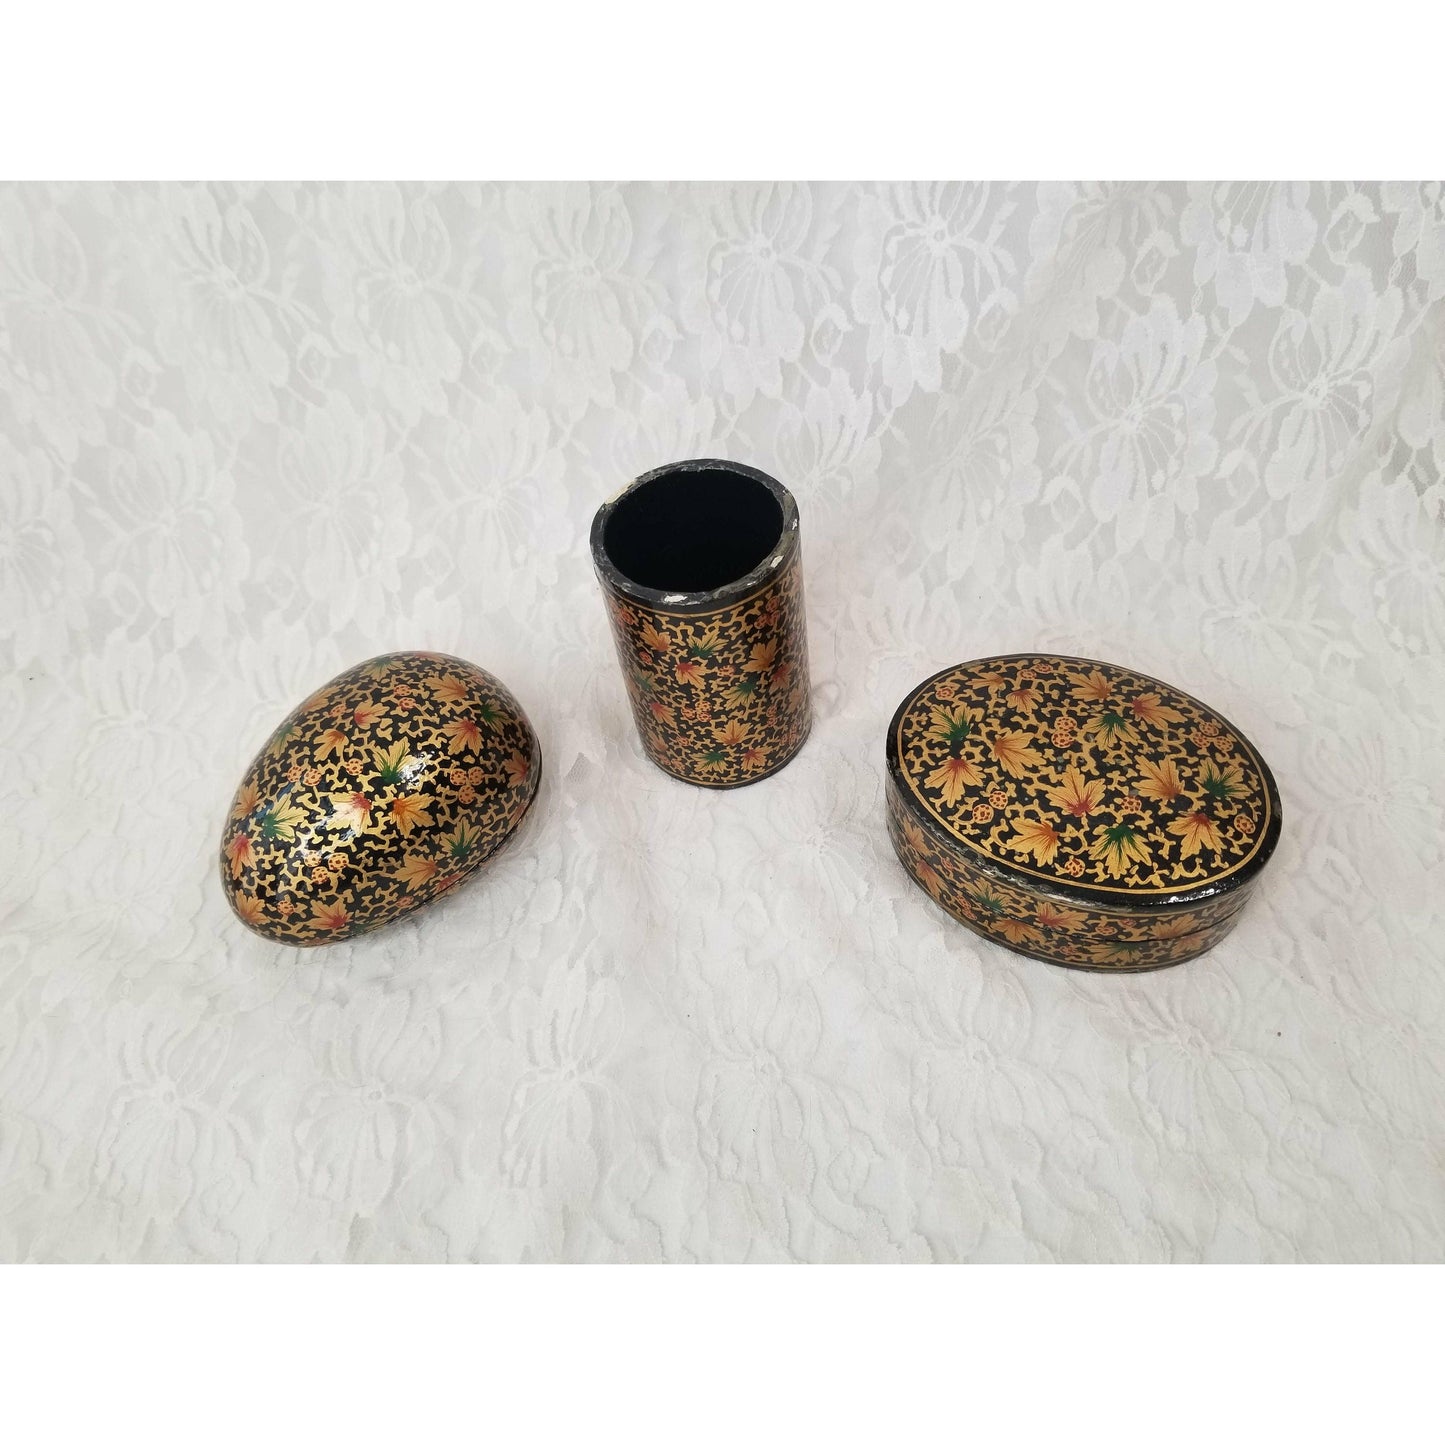 Vintage Hand Painted Persian Kashmir Paper Mache Lacquer Cup and Trinket Box Desk Set ~ Intricate Hand Painted Design ~ RARE Great Condition